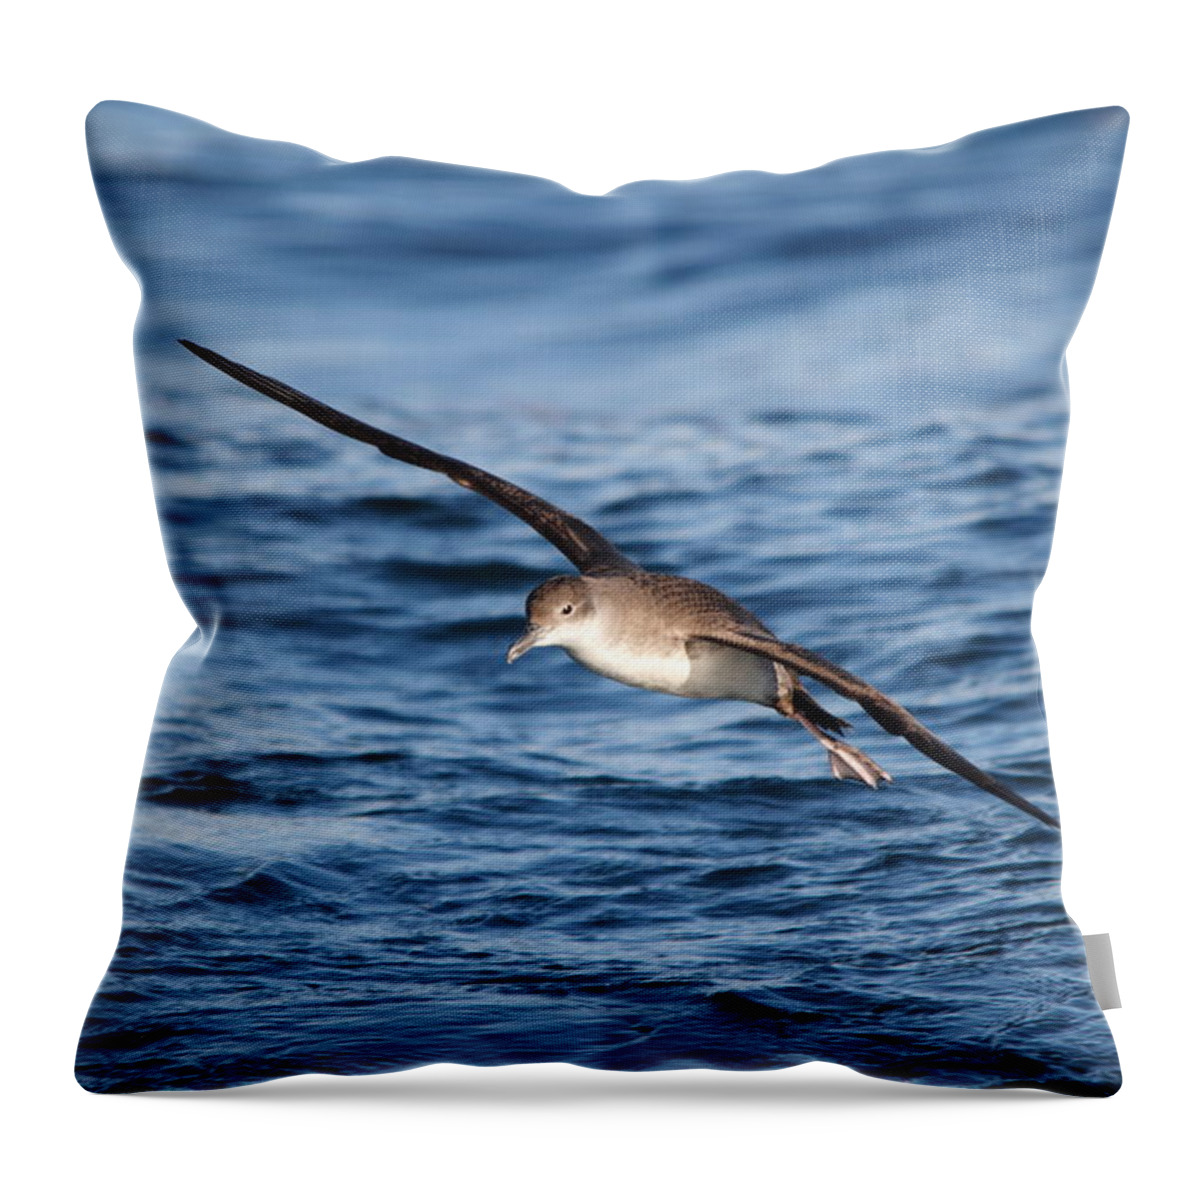 Shearwater Throw Pillow featuring the photograph Shearwater by Richard Patmore